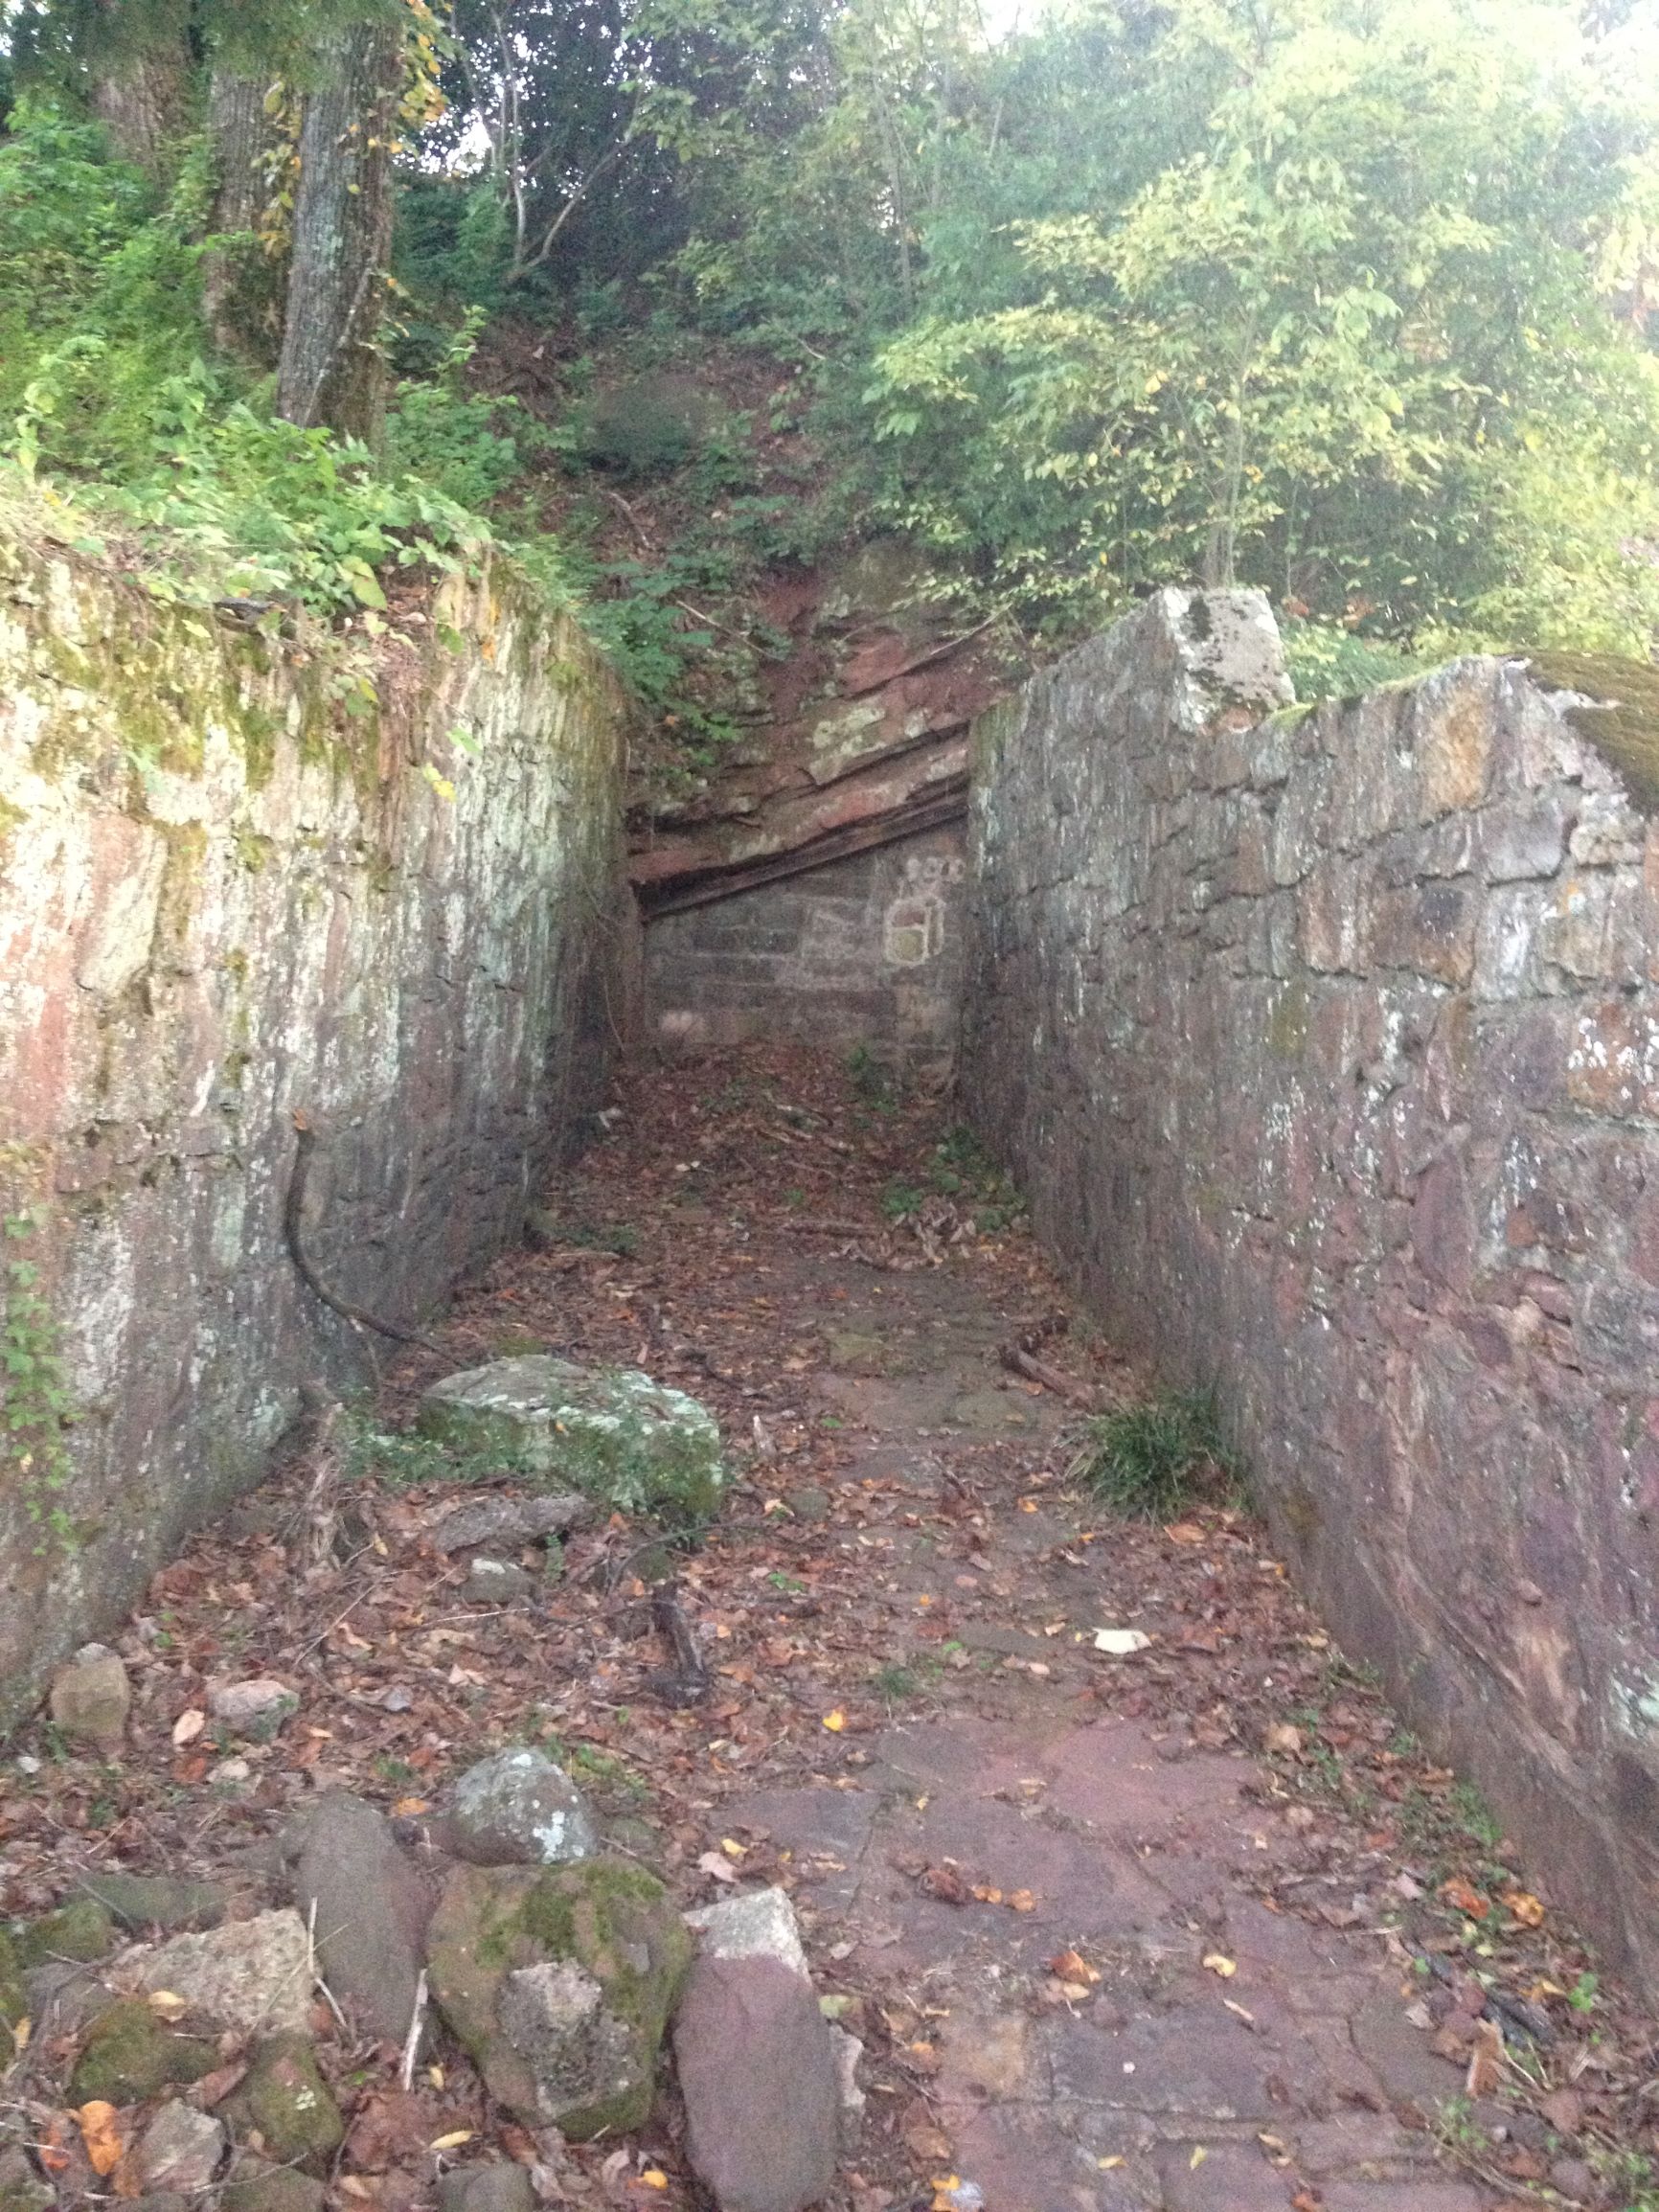 Walkway leading up to entrance to a small mine. Entrance is barred by bricks. Rock walls line the walkway. There are lots of leaves, vines, and fallen rock. 